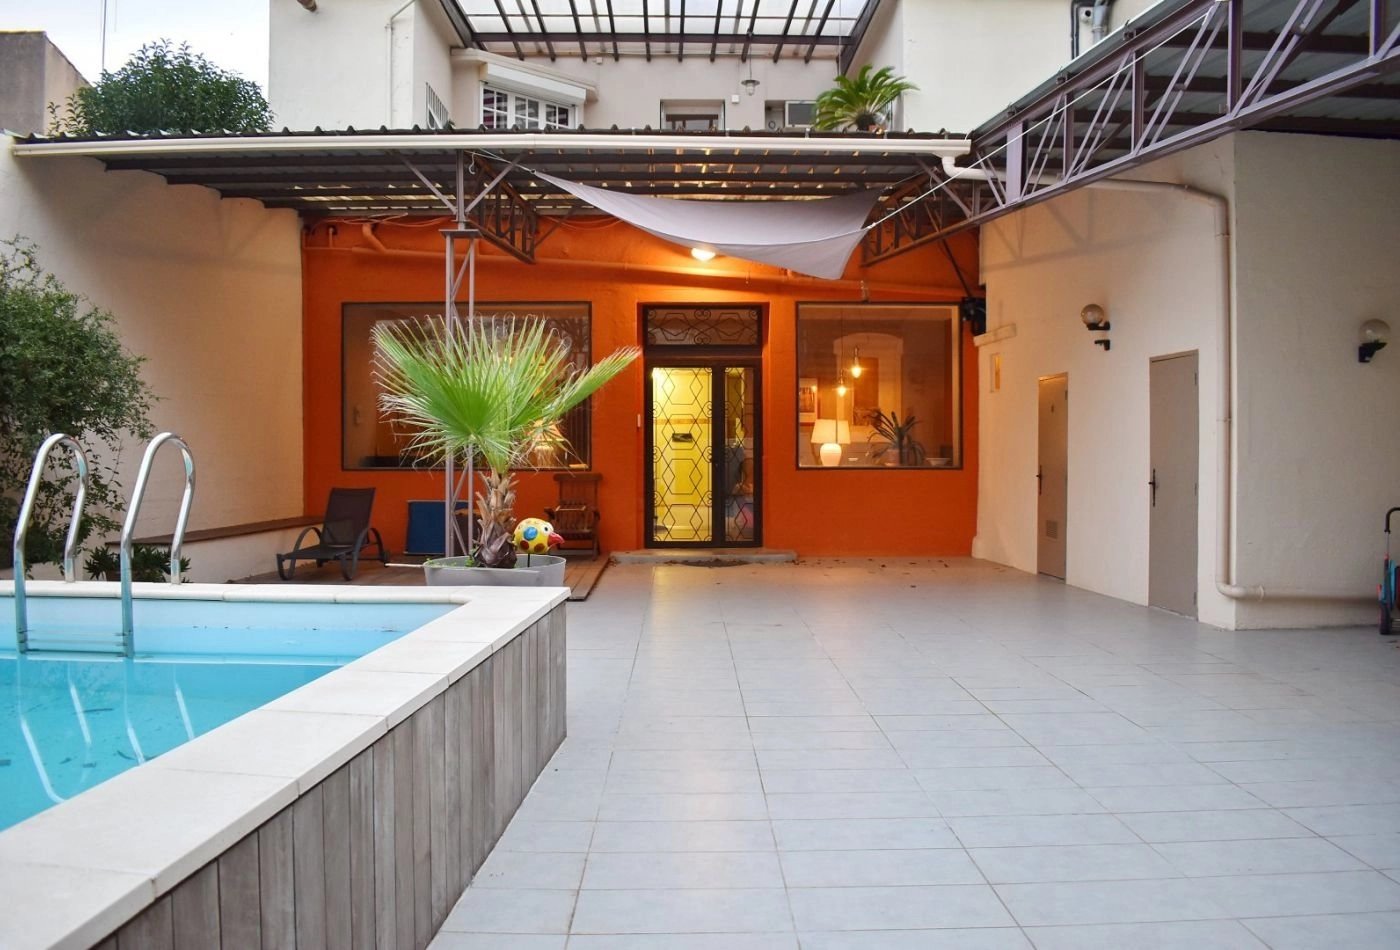 Townhouse with pool in Béziers